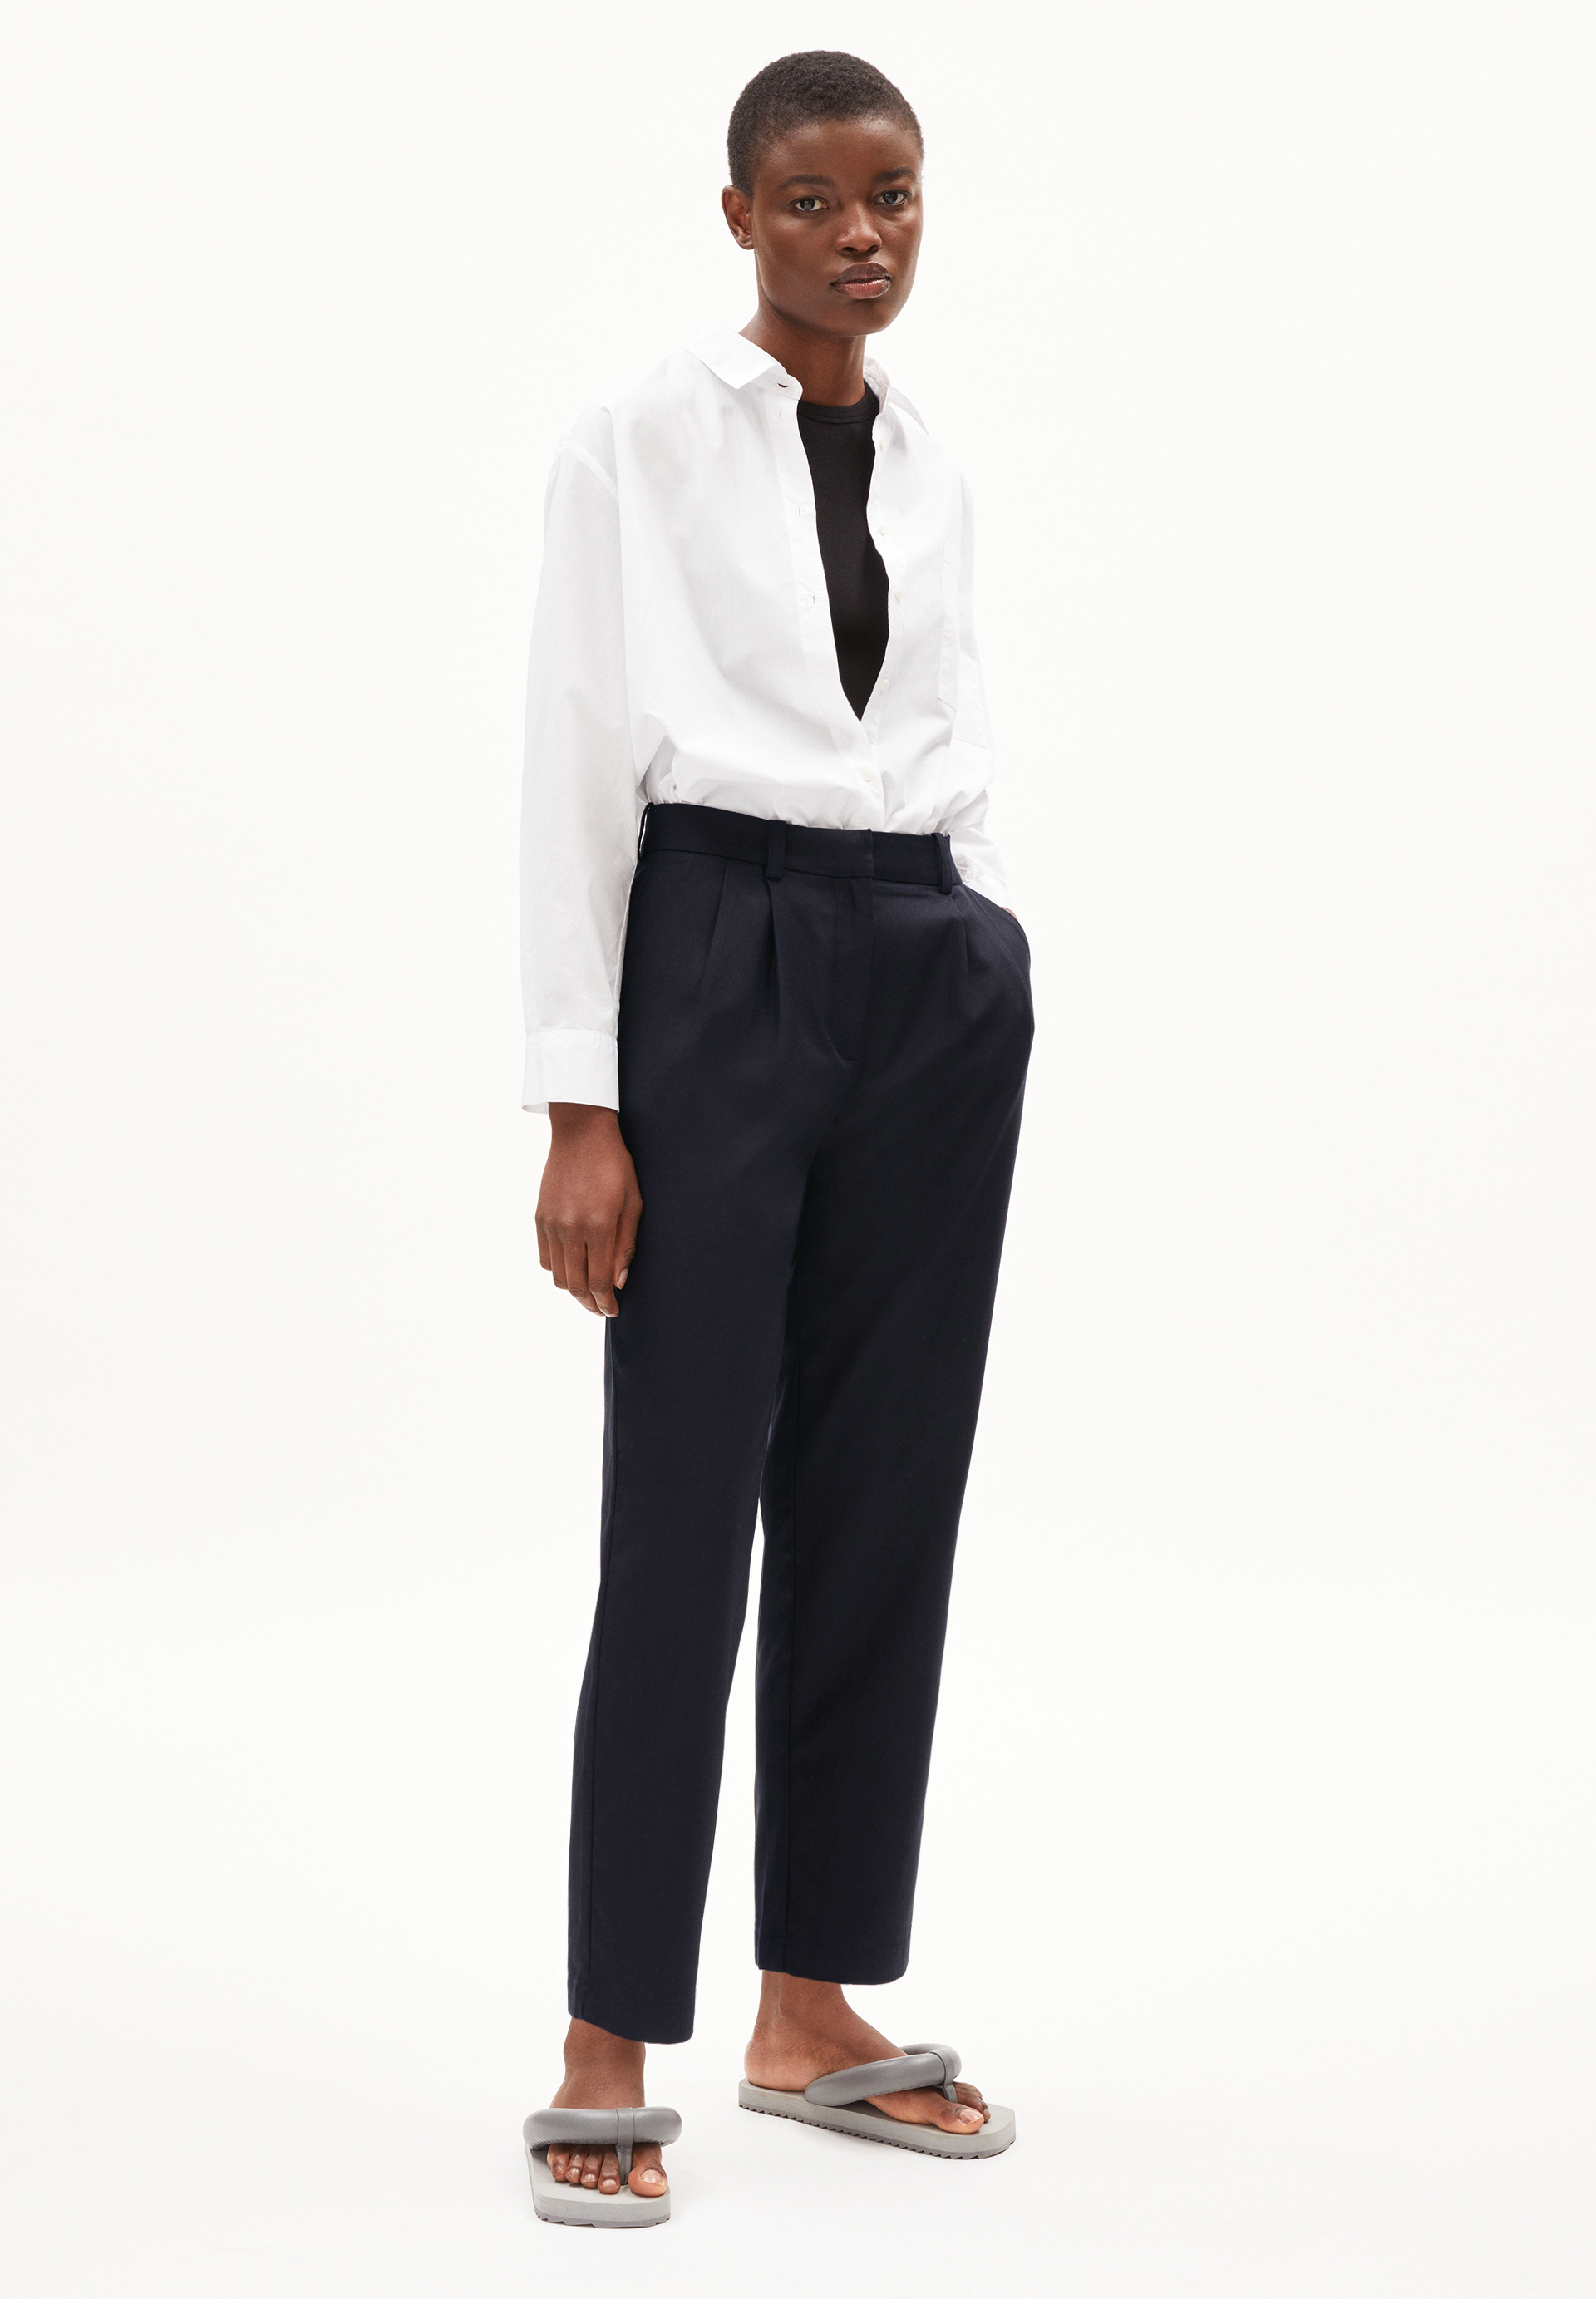 ATETAA Pants Relaxed Fit made of TENCEL™ Lyocell Mix